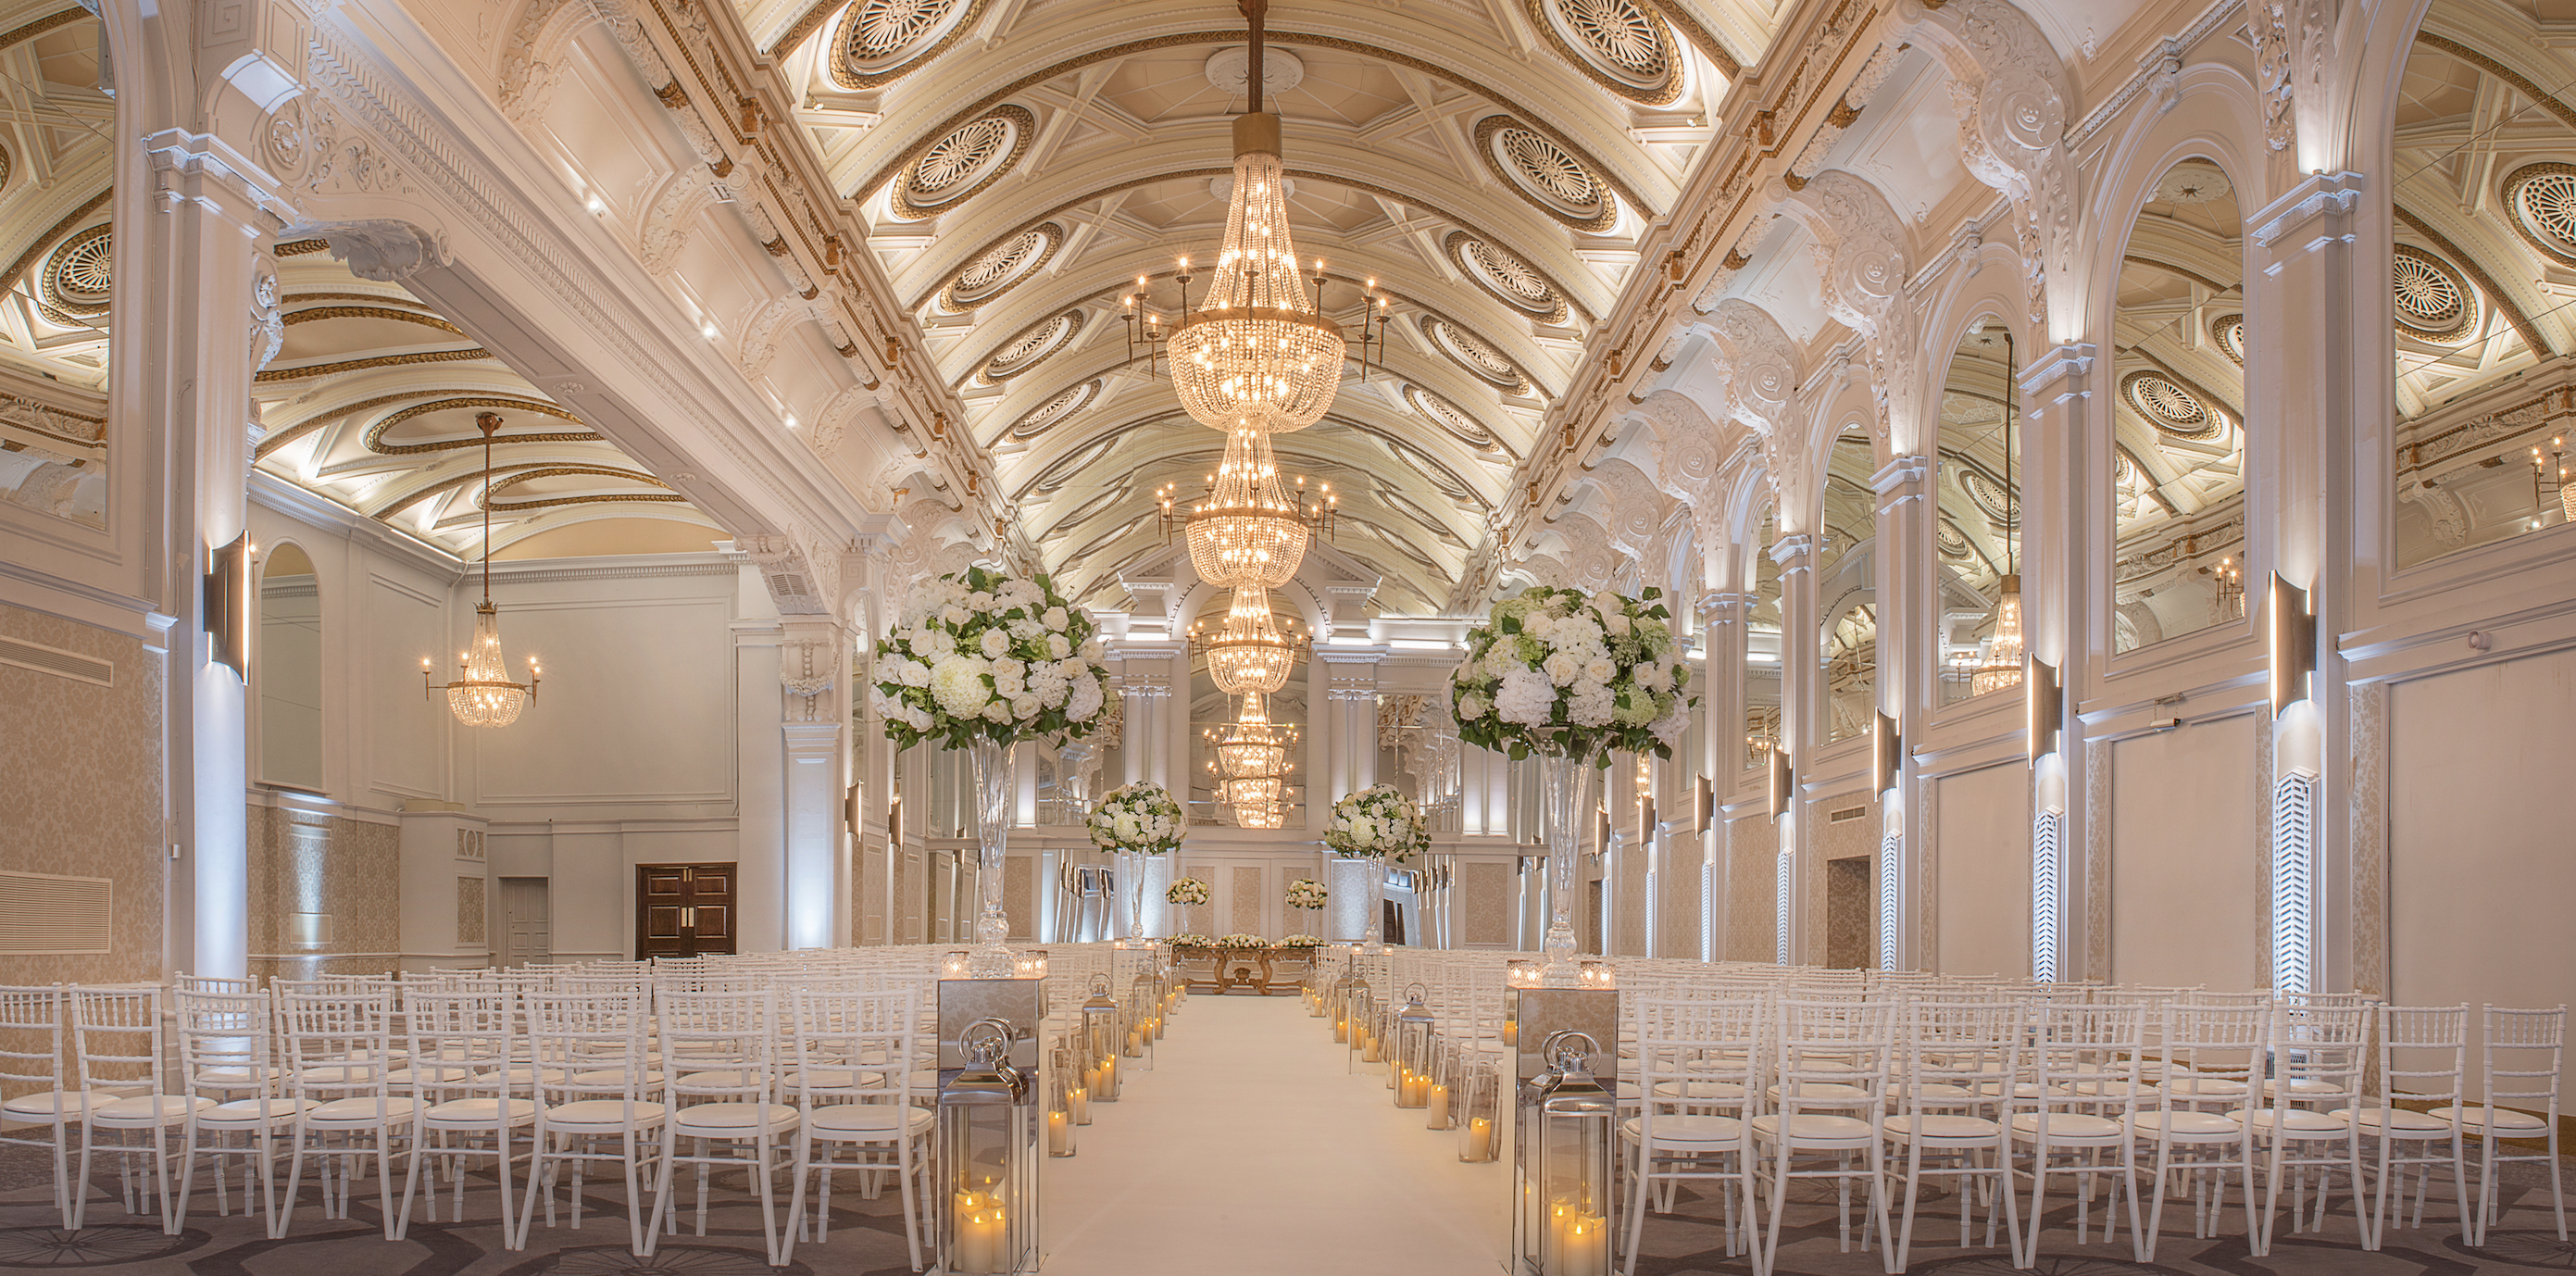 23 Stunning Large Capacity Wedding Venues For 600+ Guests - Eternity